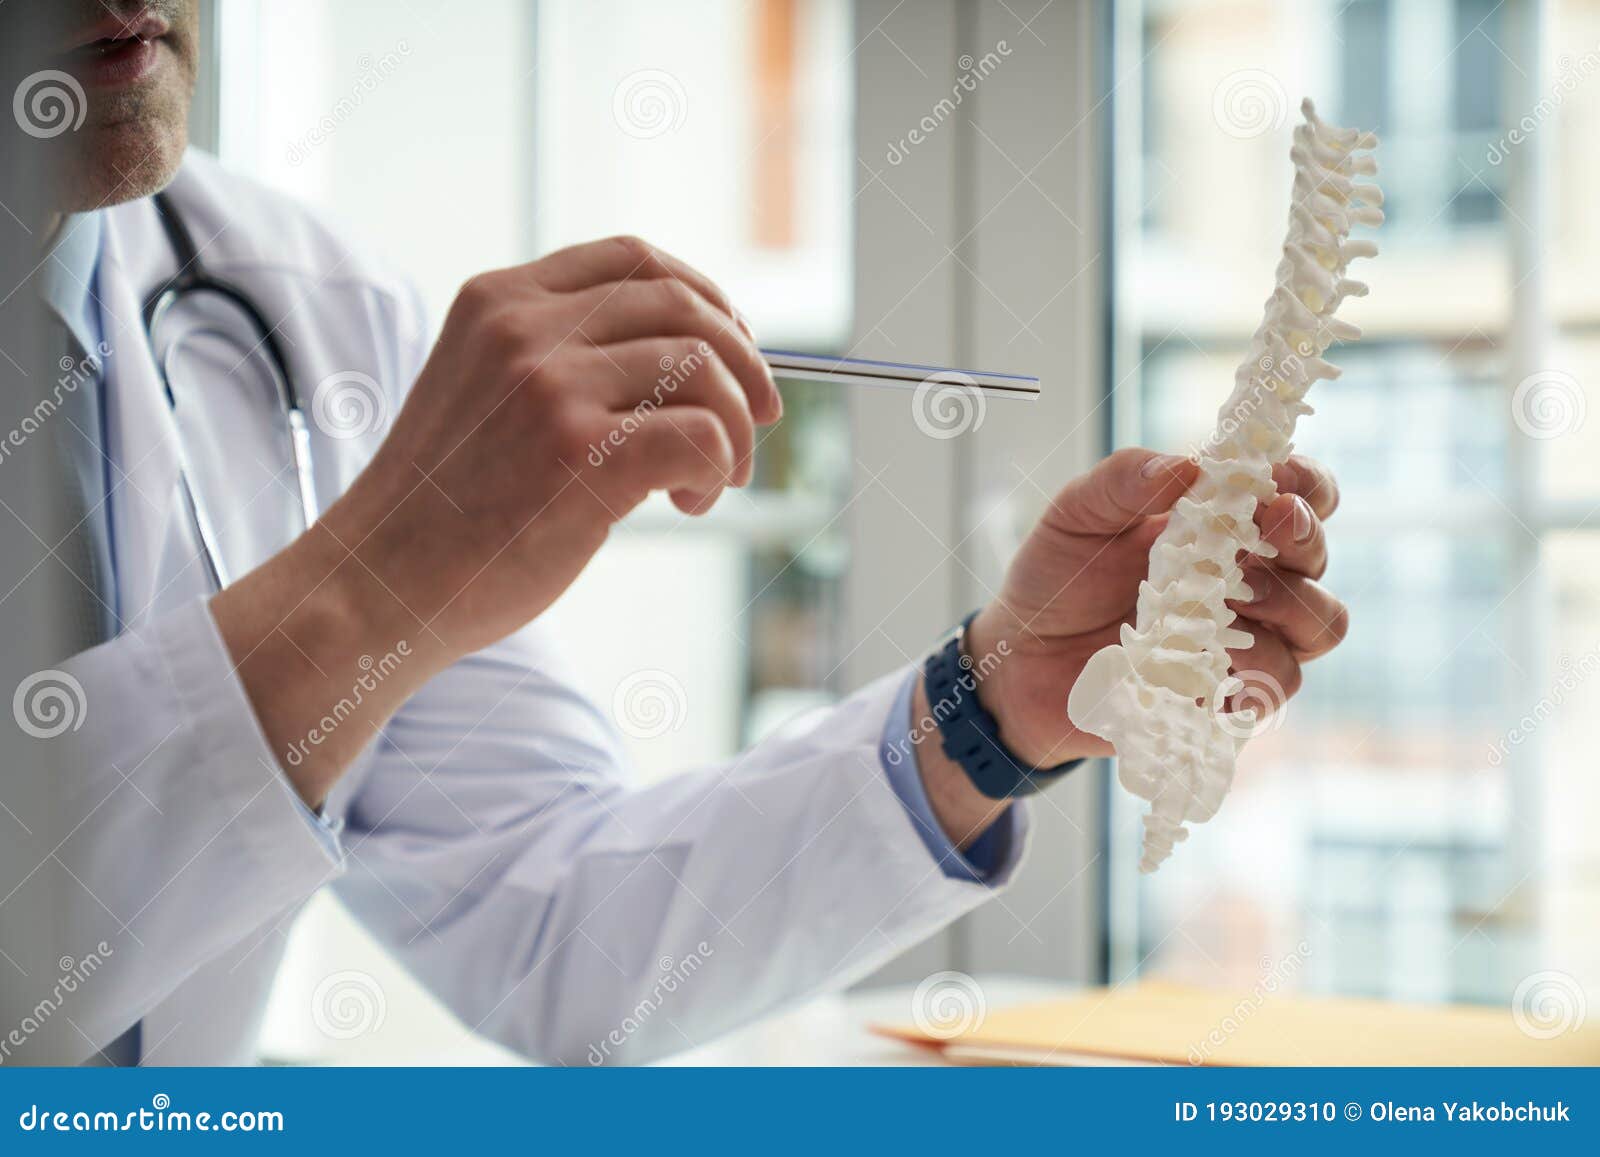 doctor holding a model of a human spine